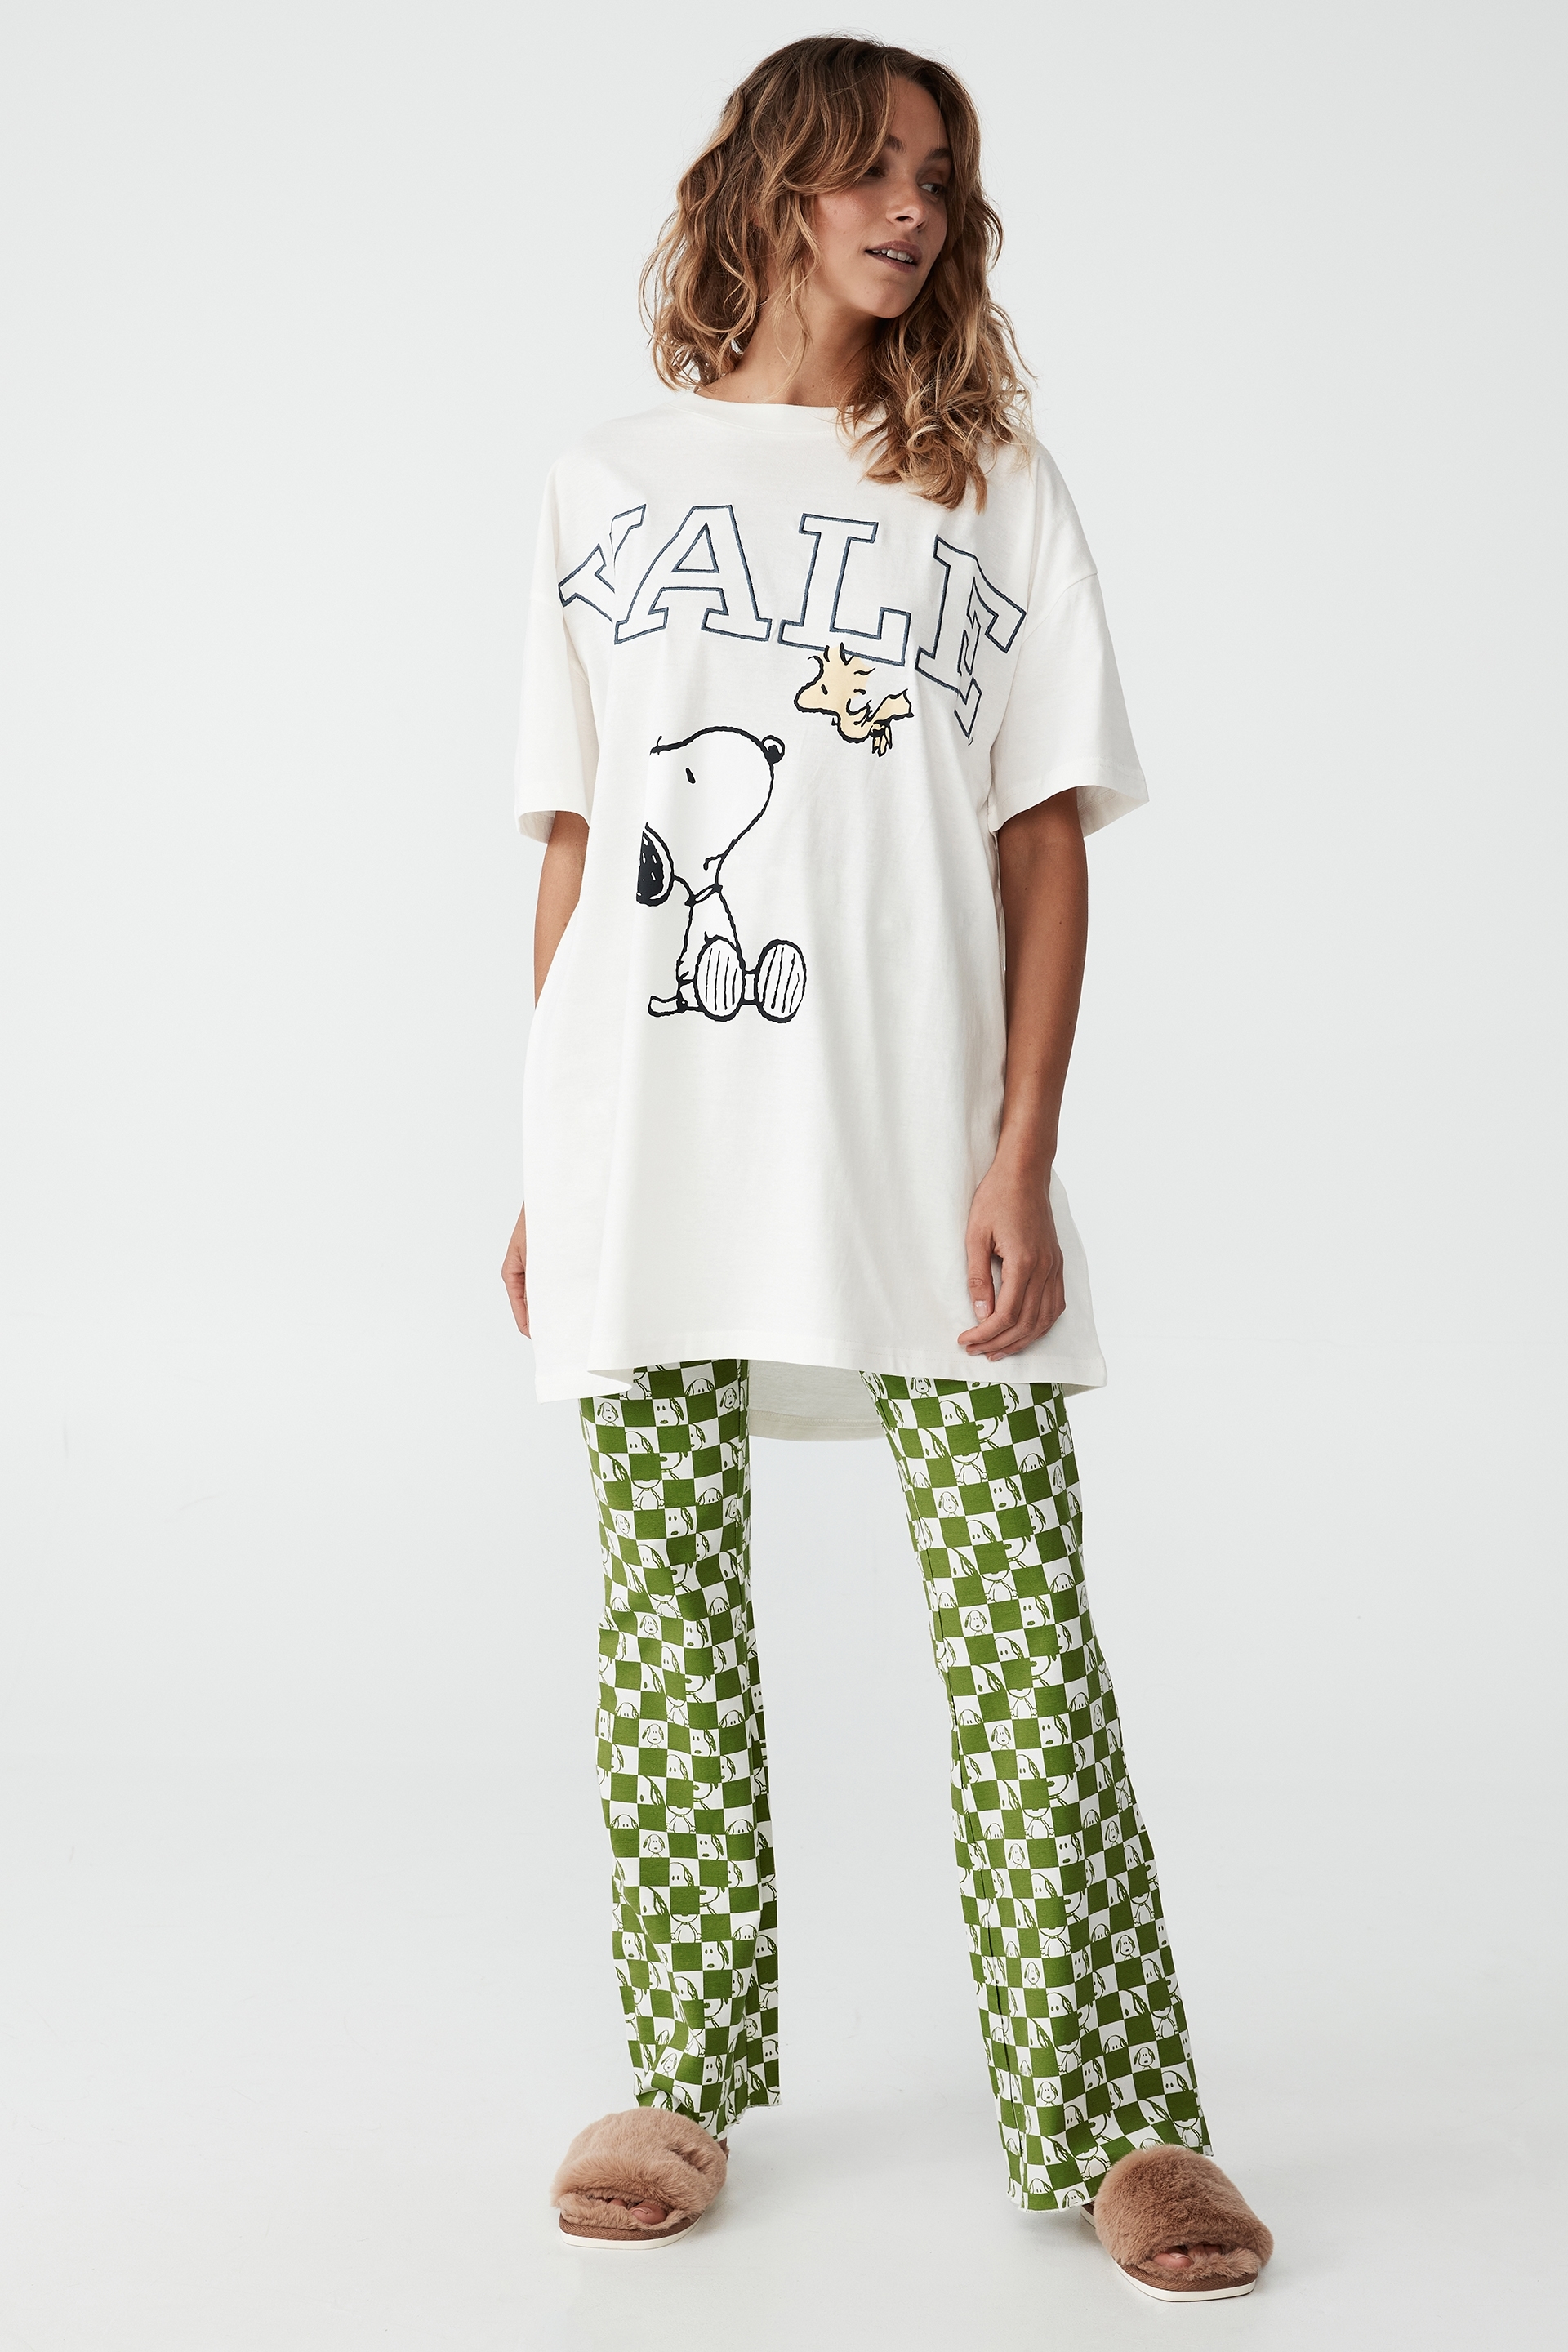 Body - Jersey Bed Flare Pant - Lcn pea/snoopy checkerboard